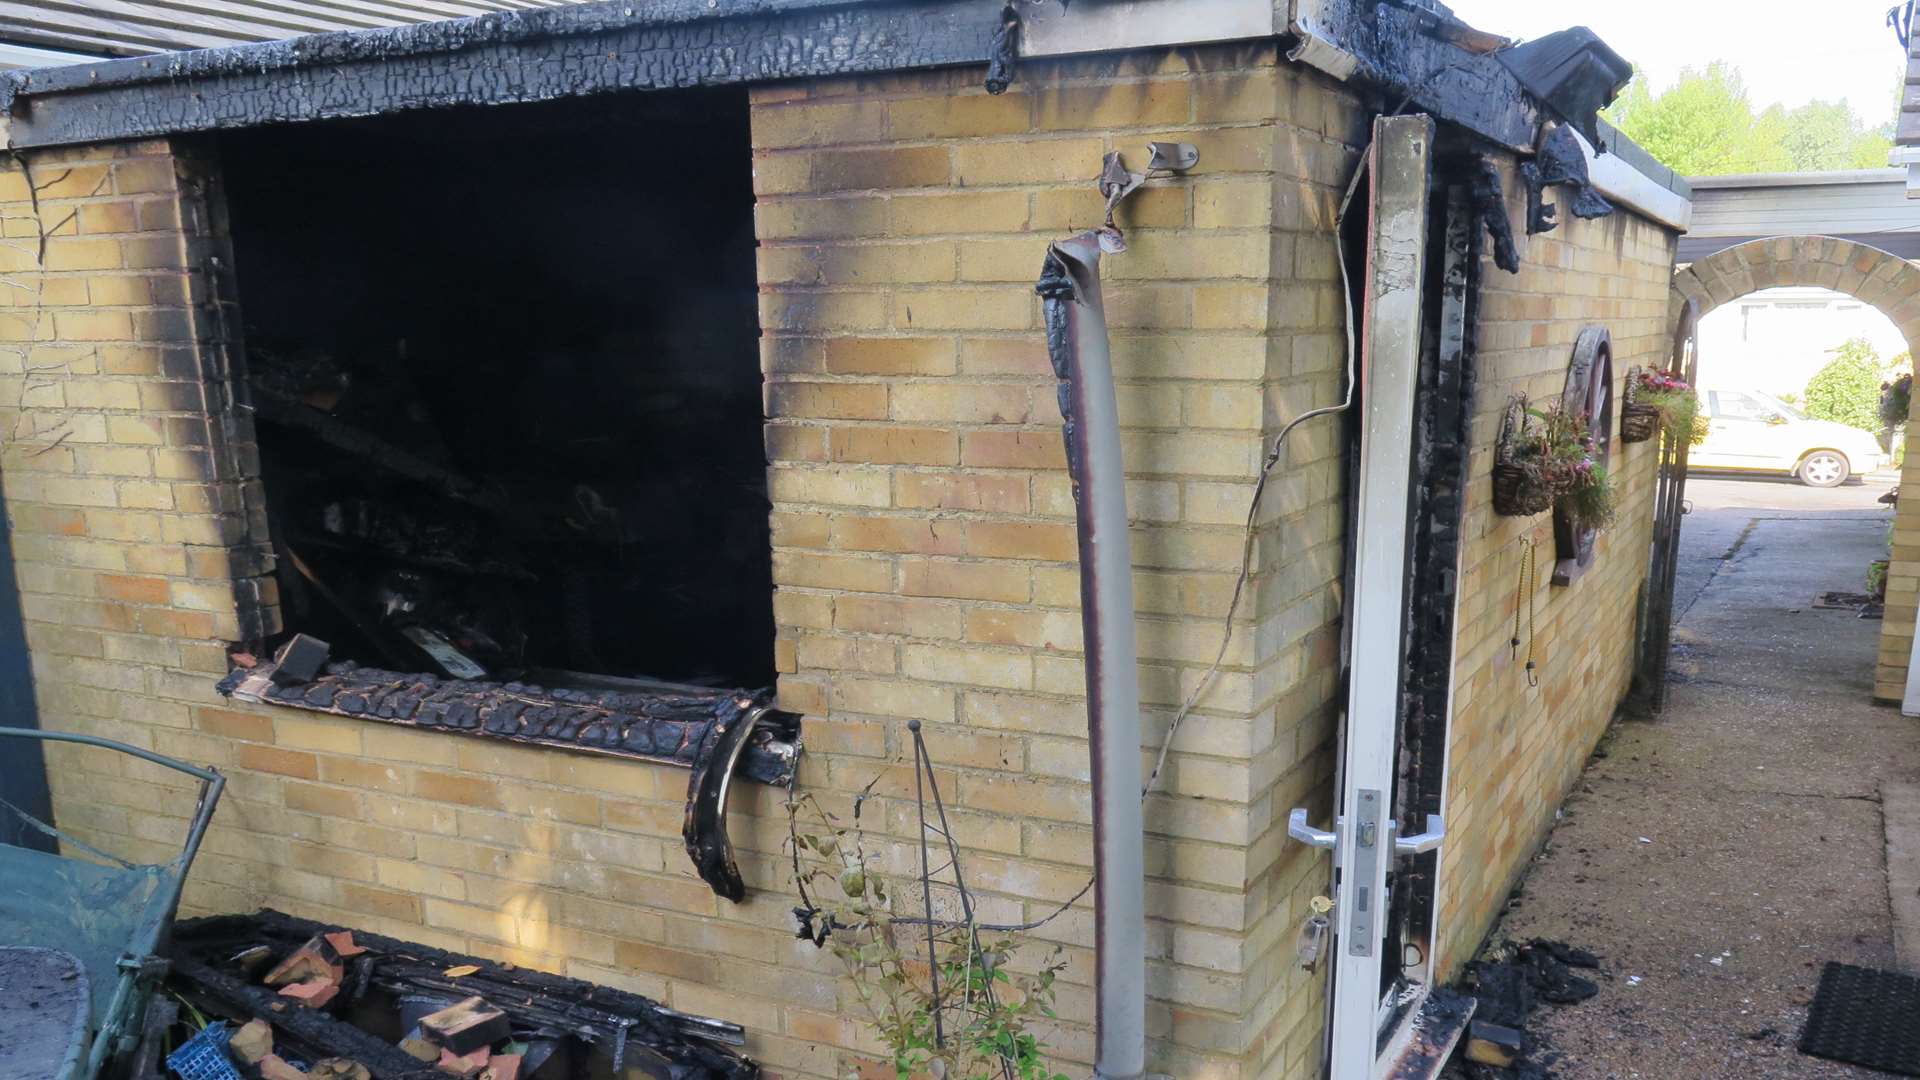 The garage was badly damaged by fire following a lightning strike